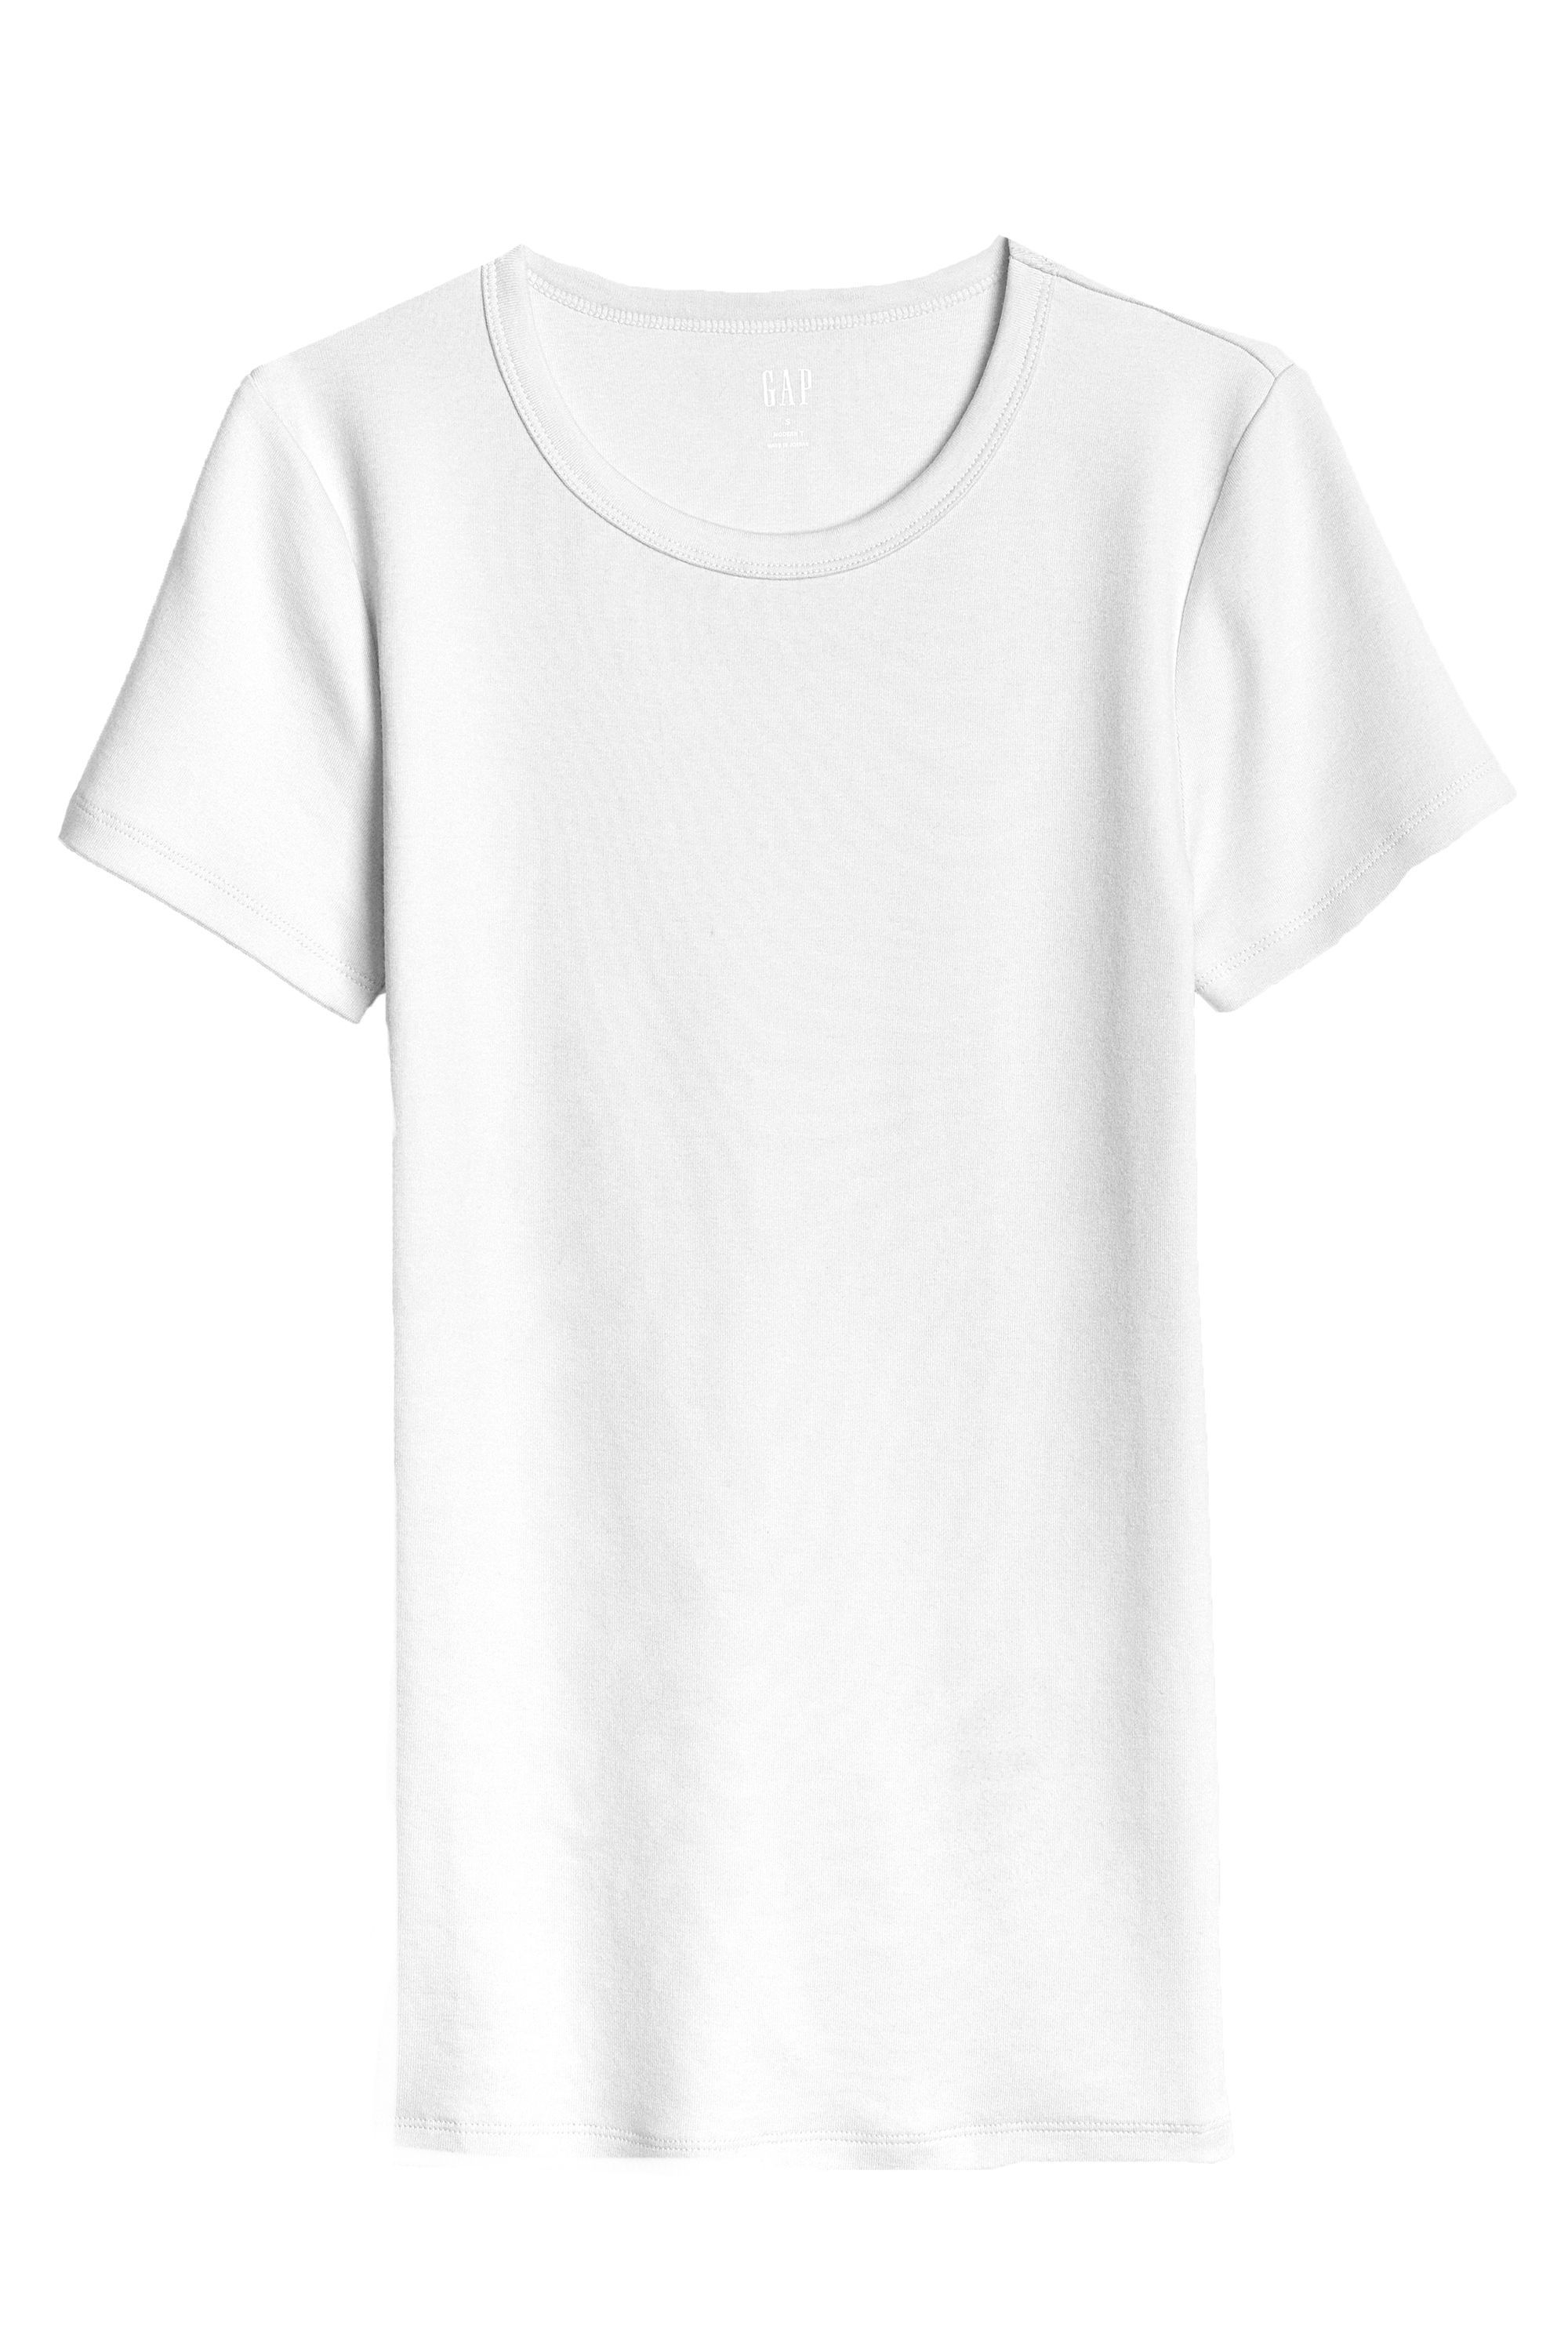 10 Best White T Shirts 2019 Perfect White Tee Shirts For Summer